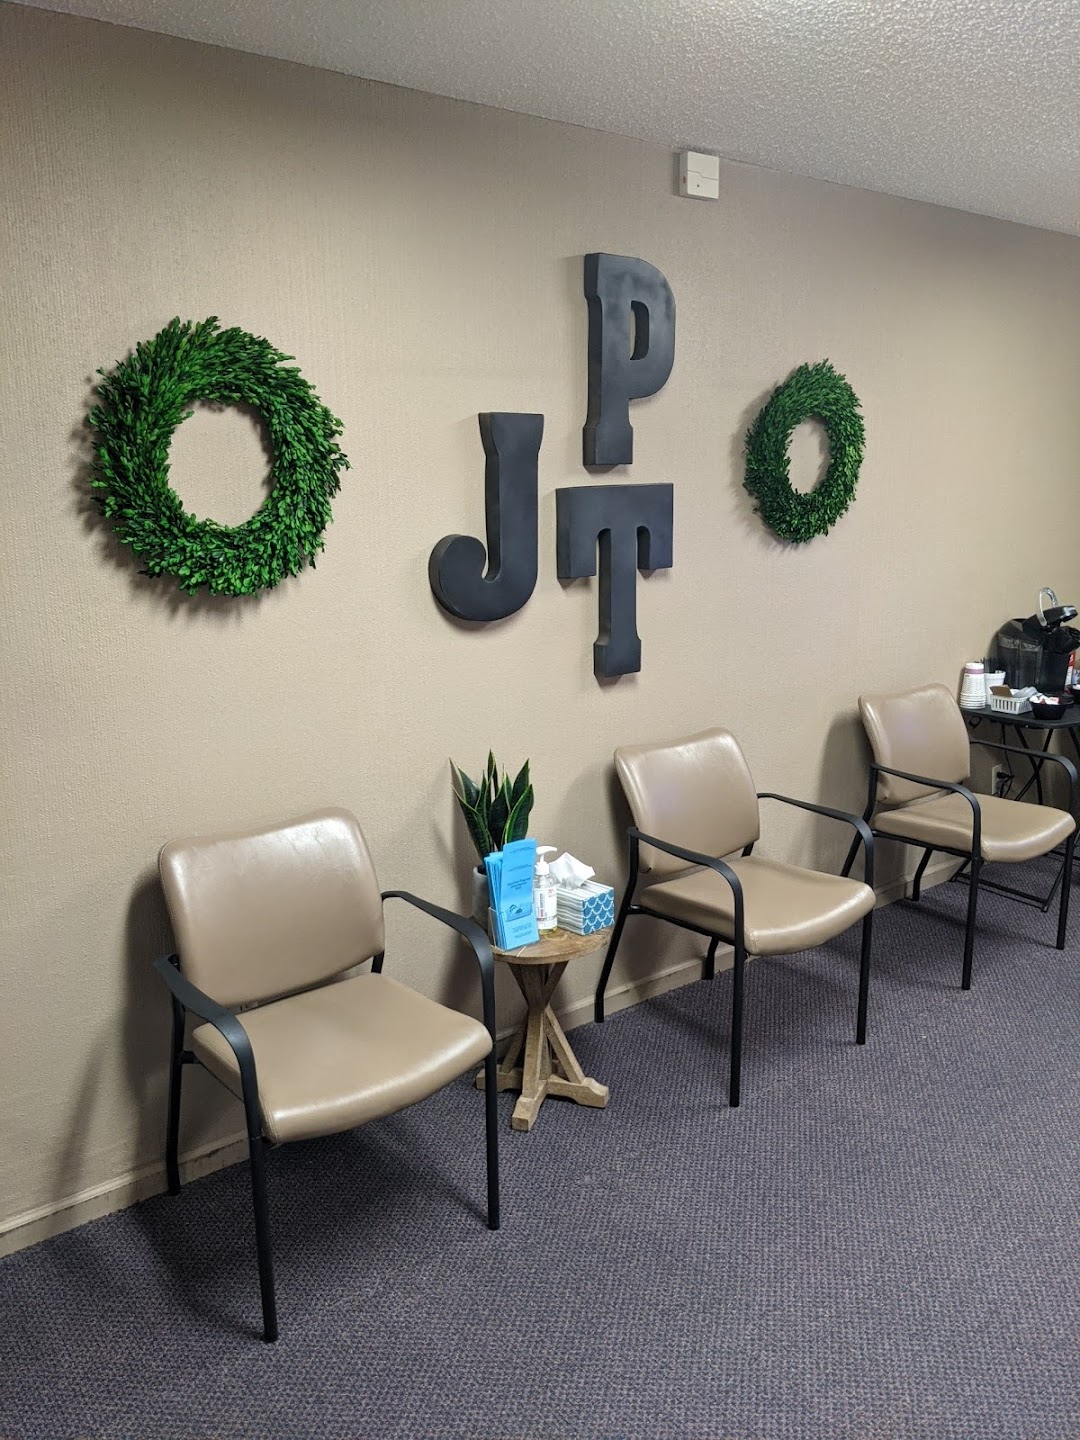 Jacksonville Physical Therapy